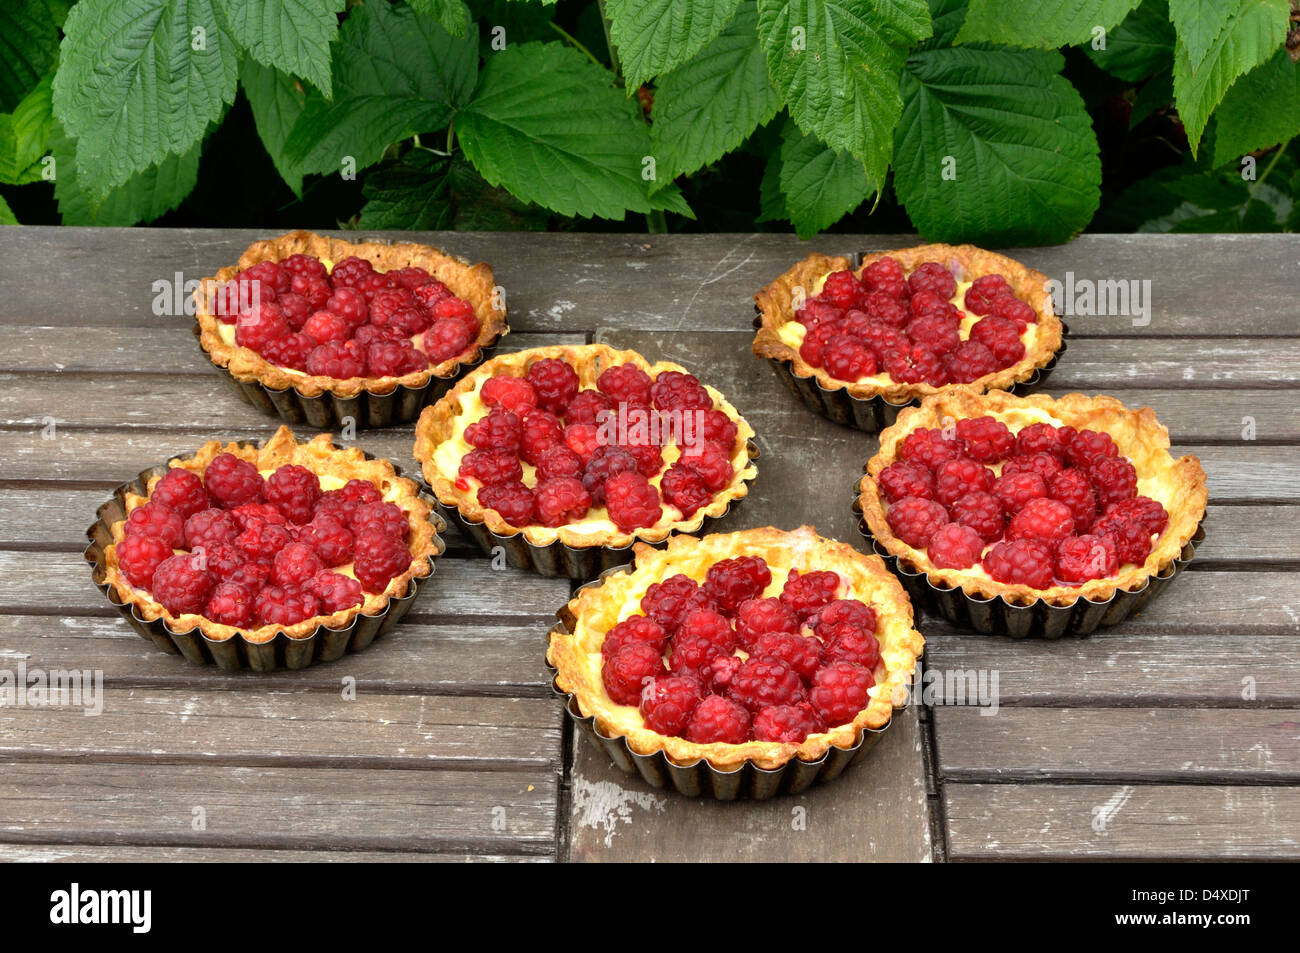 Mince pies with raspberries (Rubus idaeus) on the table of the garden. Stock Photo